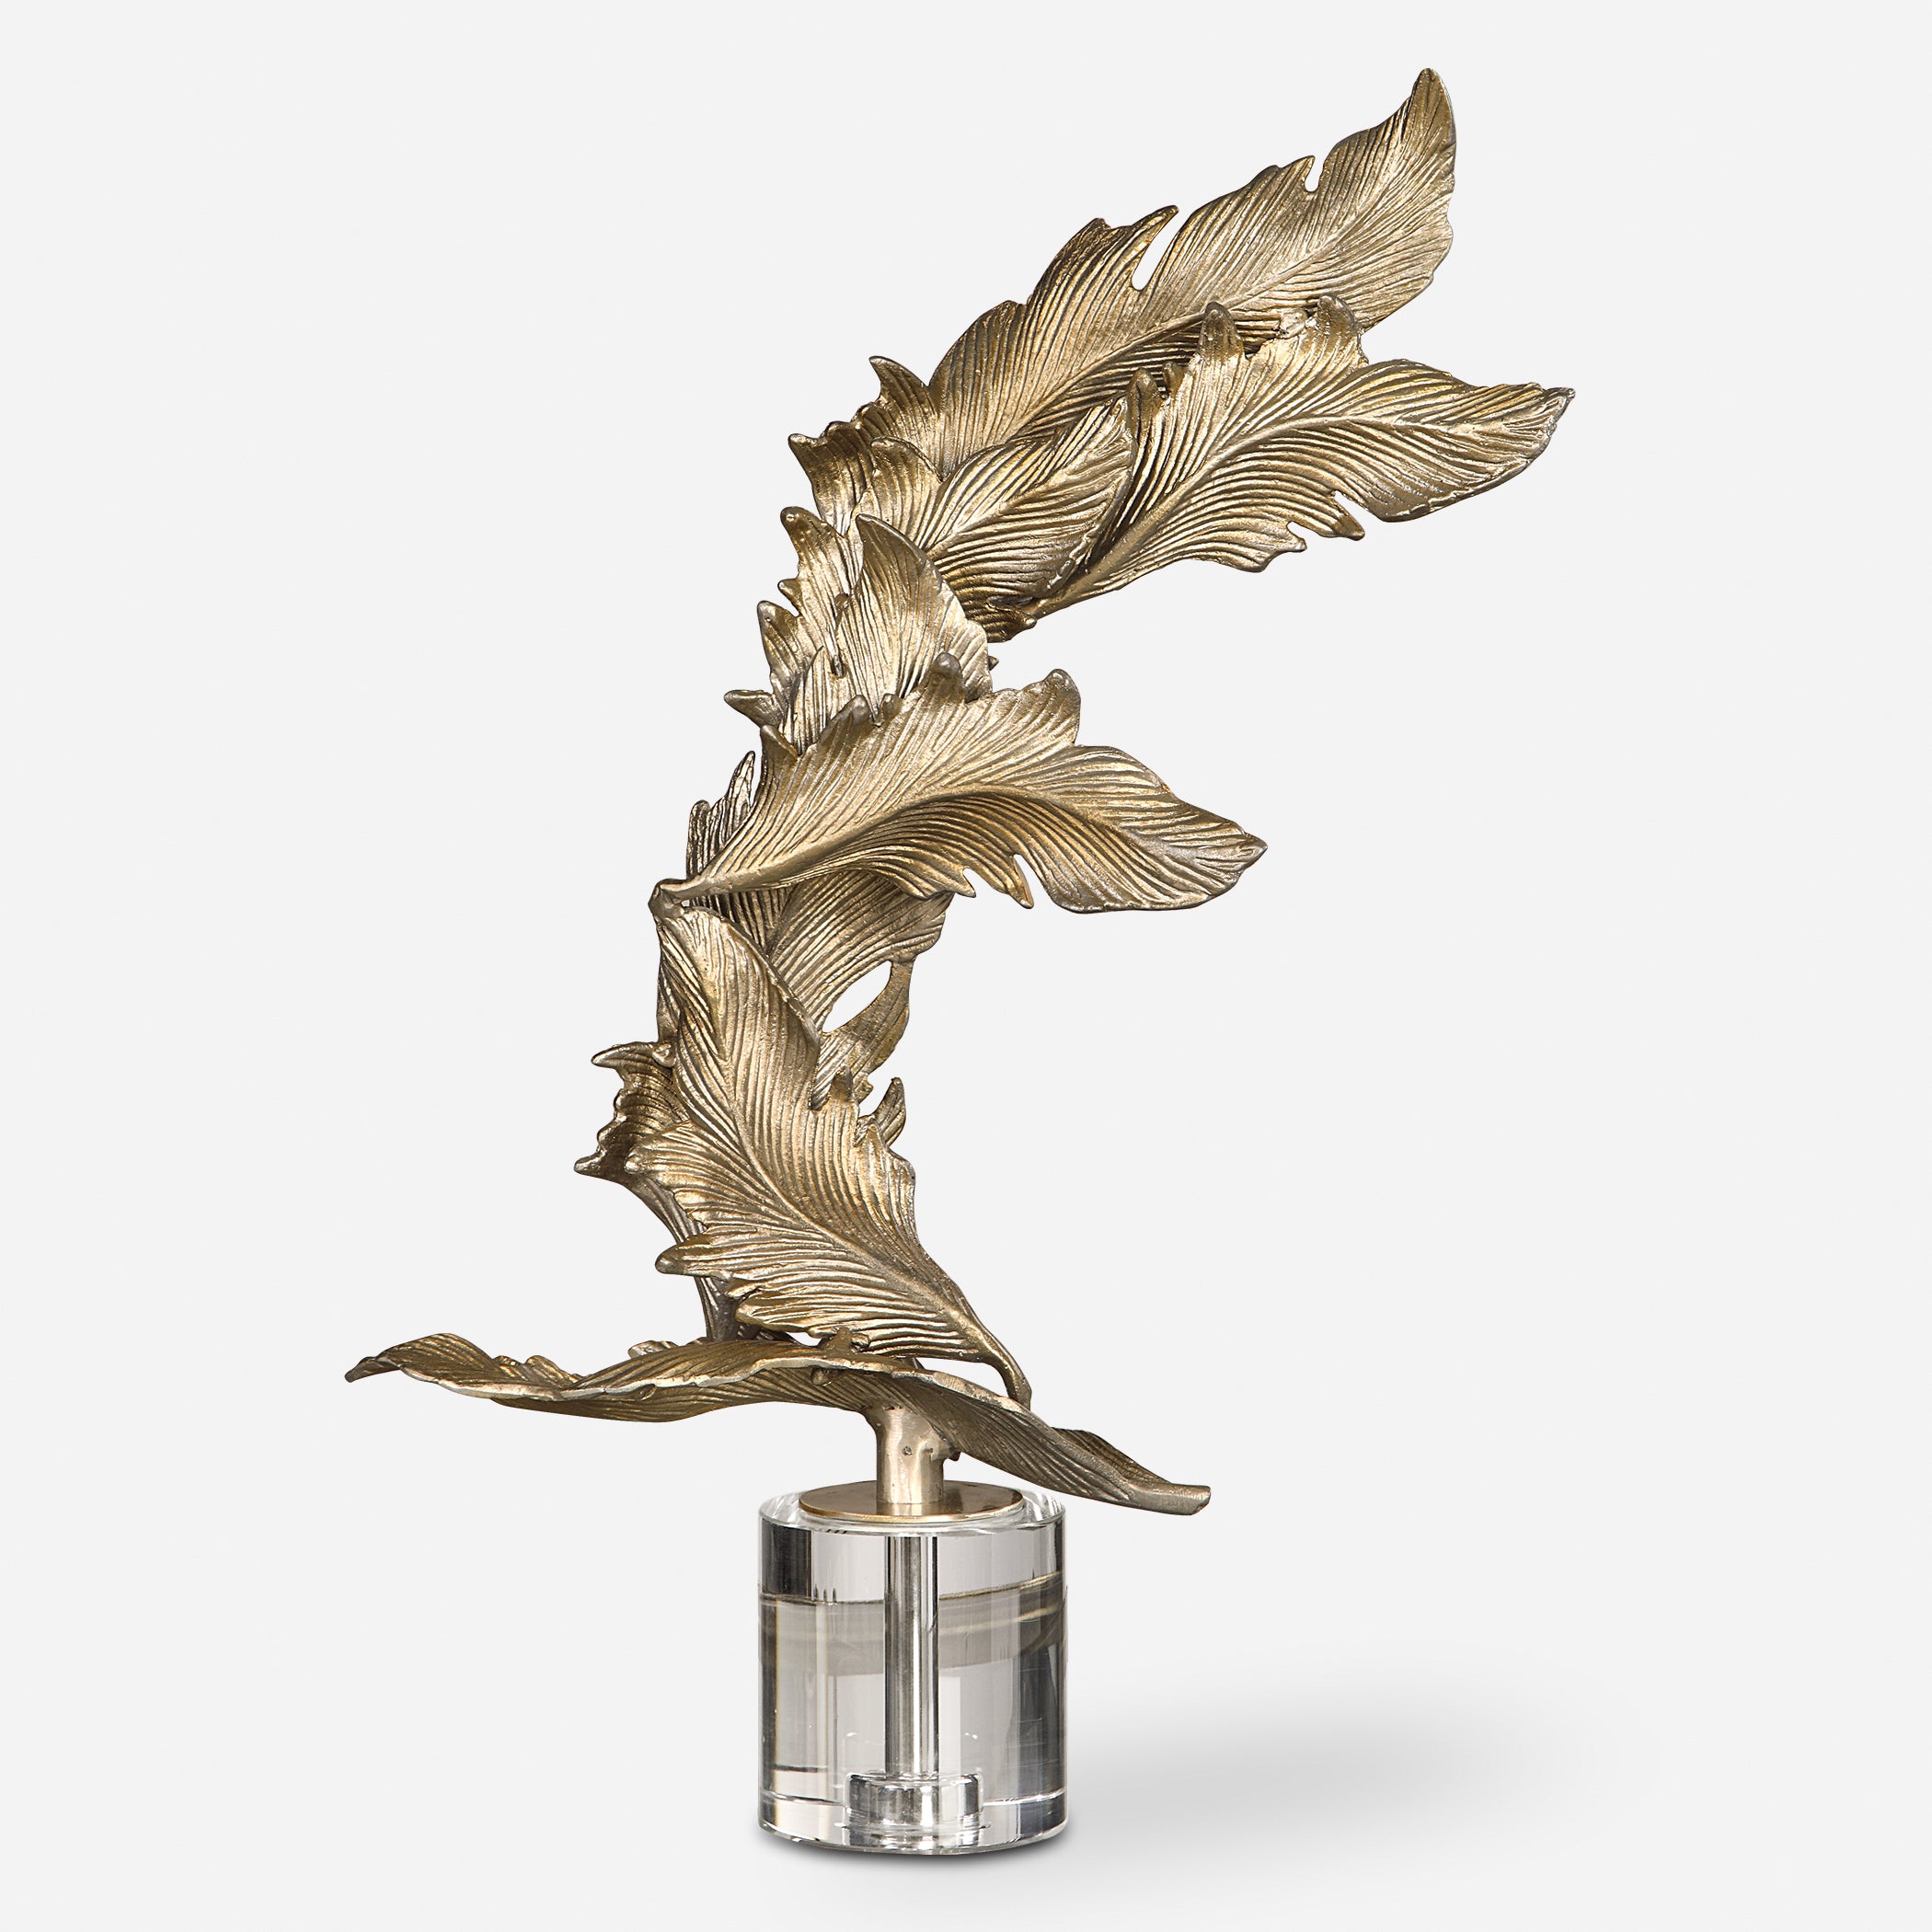 Uttermost Fall Leaves Figurines & Sculptures Figurines & Sculptures Uttermost   